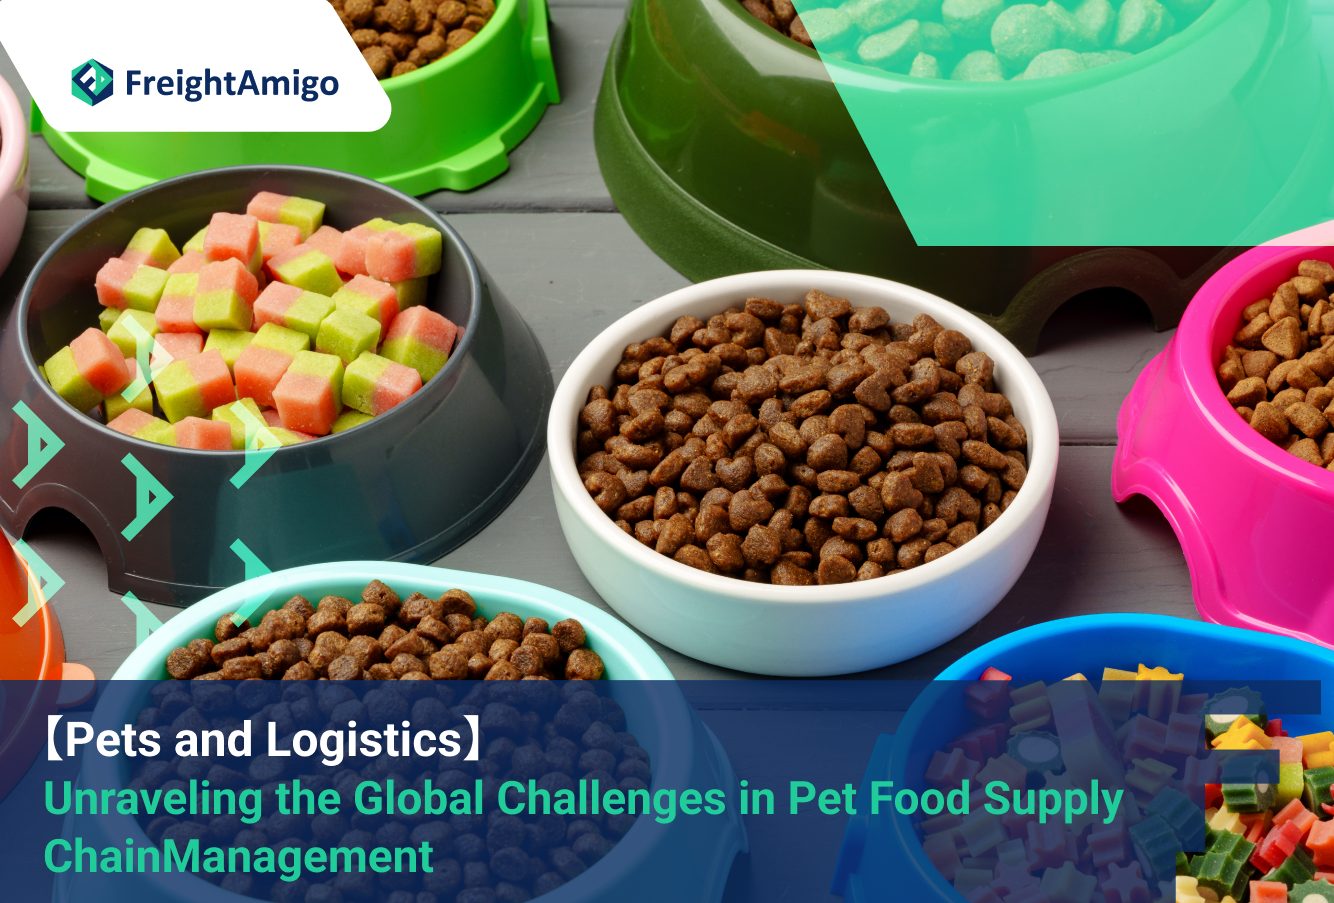 【Pets and Logistics】Unraveling the Global Challenges in Pet Food Supply Chain Management